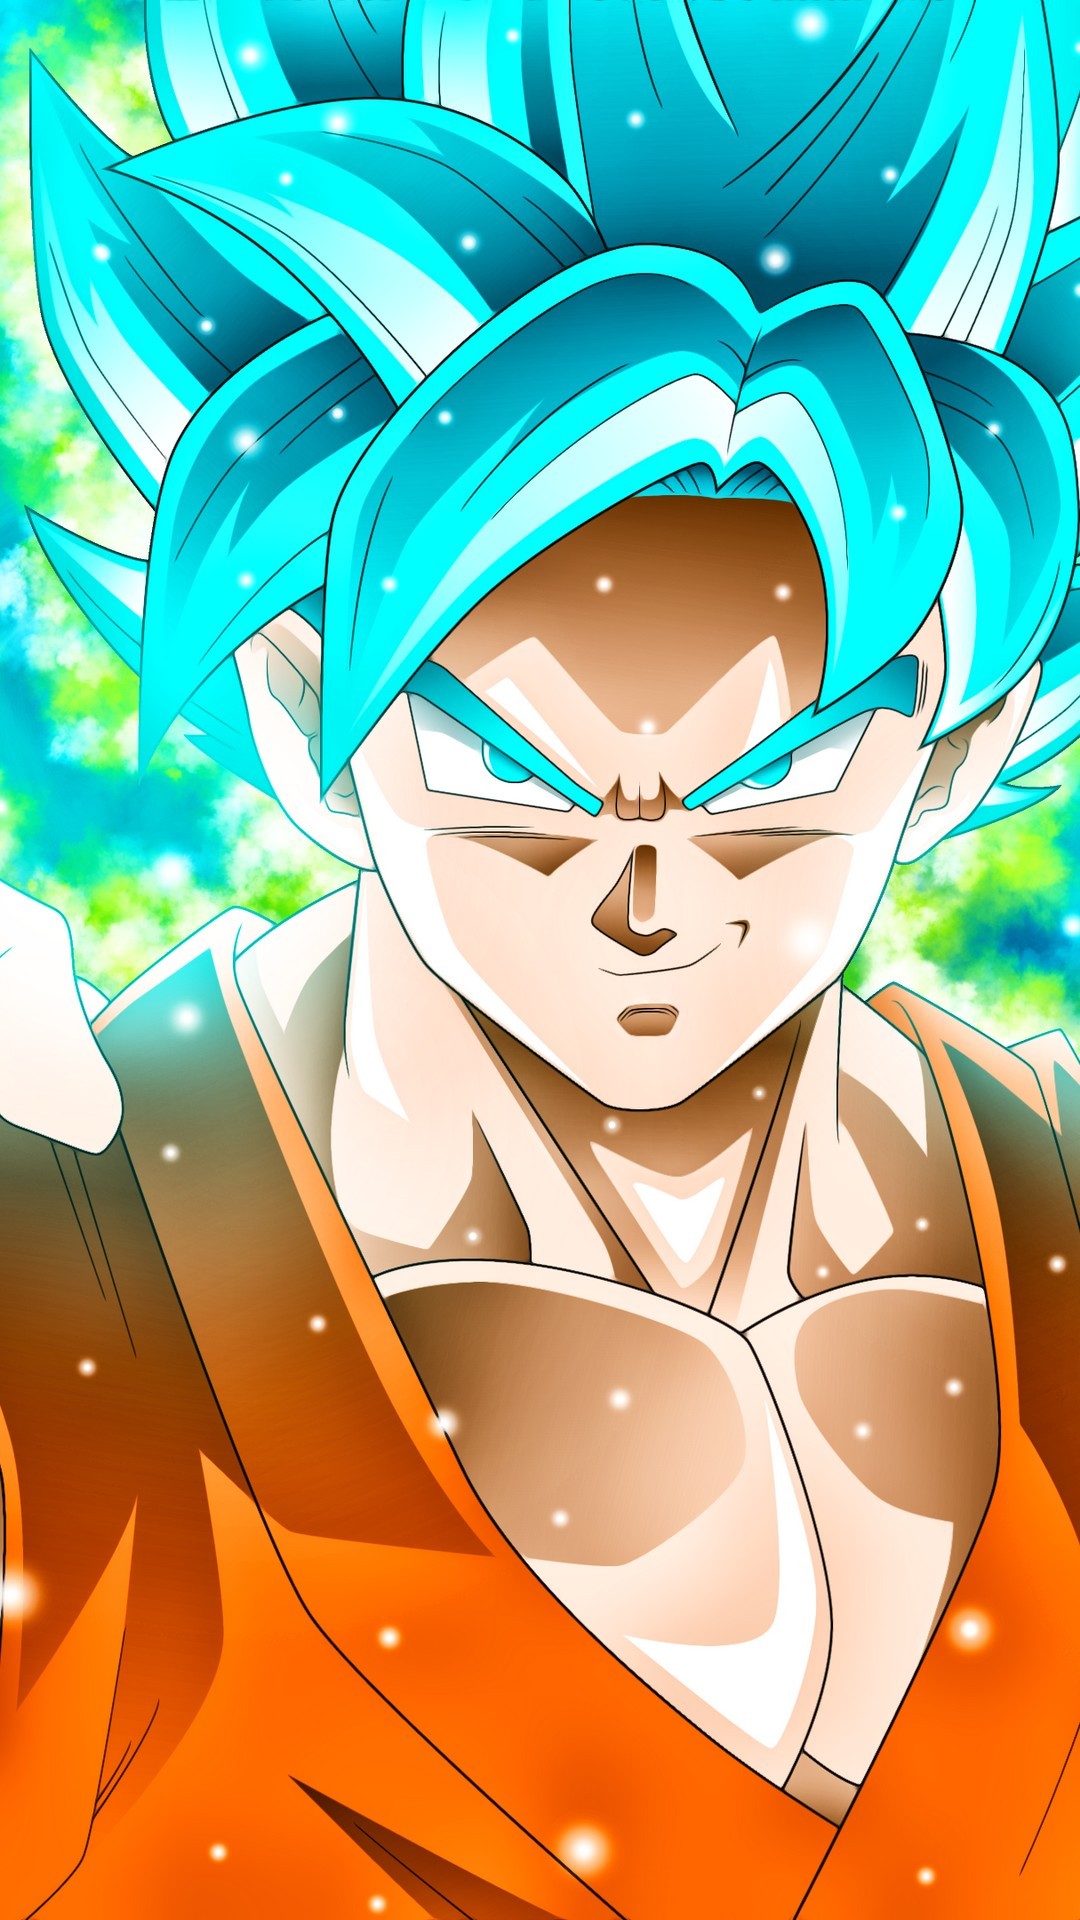 Wallpaper Goku SSJ Blue iPhone with image resolution 1080x1920 pixel. You can make this wallpaper for your iPhone 5, 6, 7, 8, X backgrounds, Mobile Screensaver, or iPad Lock Screen